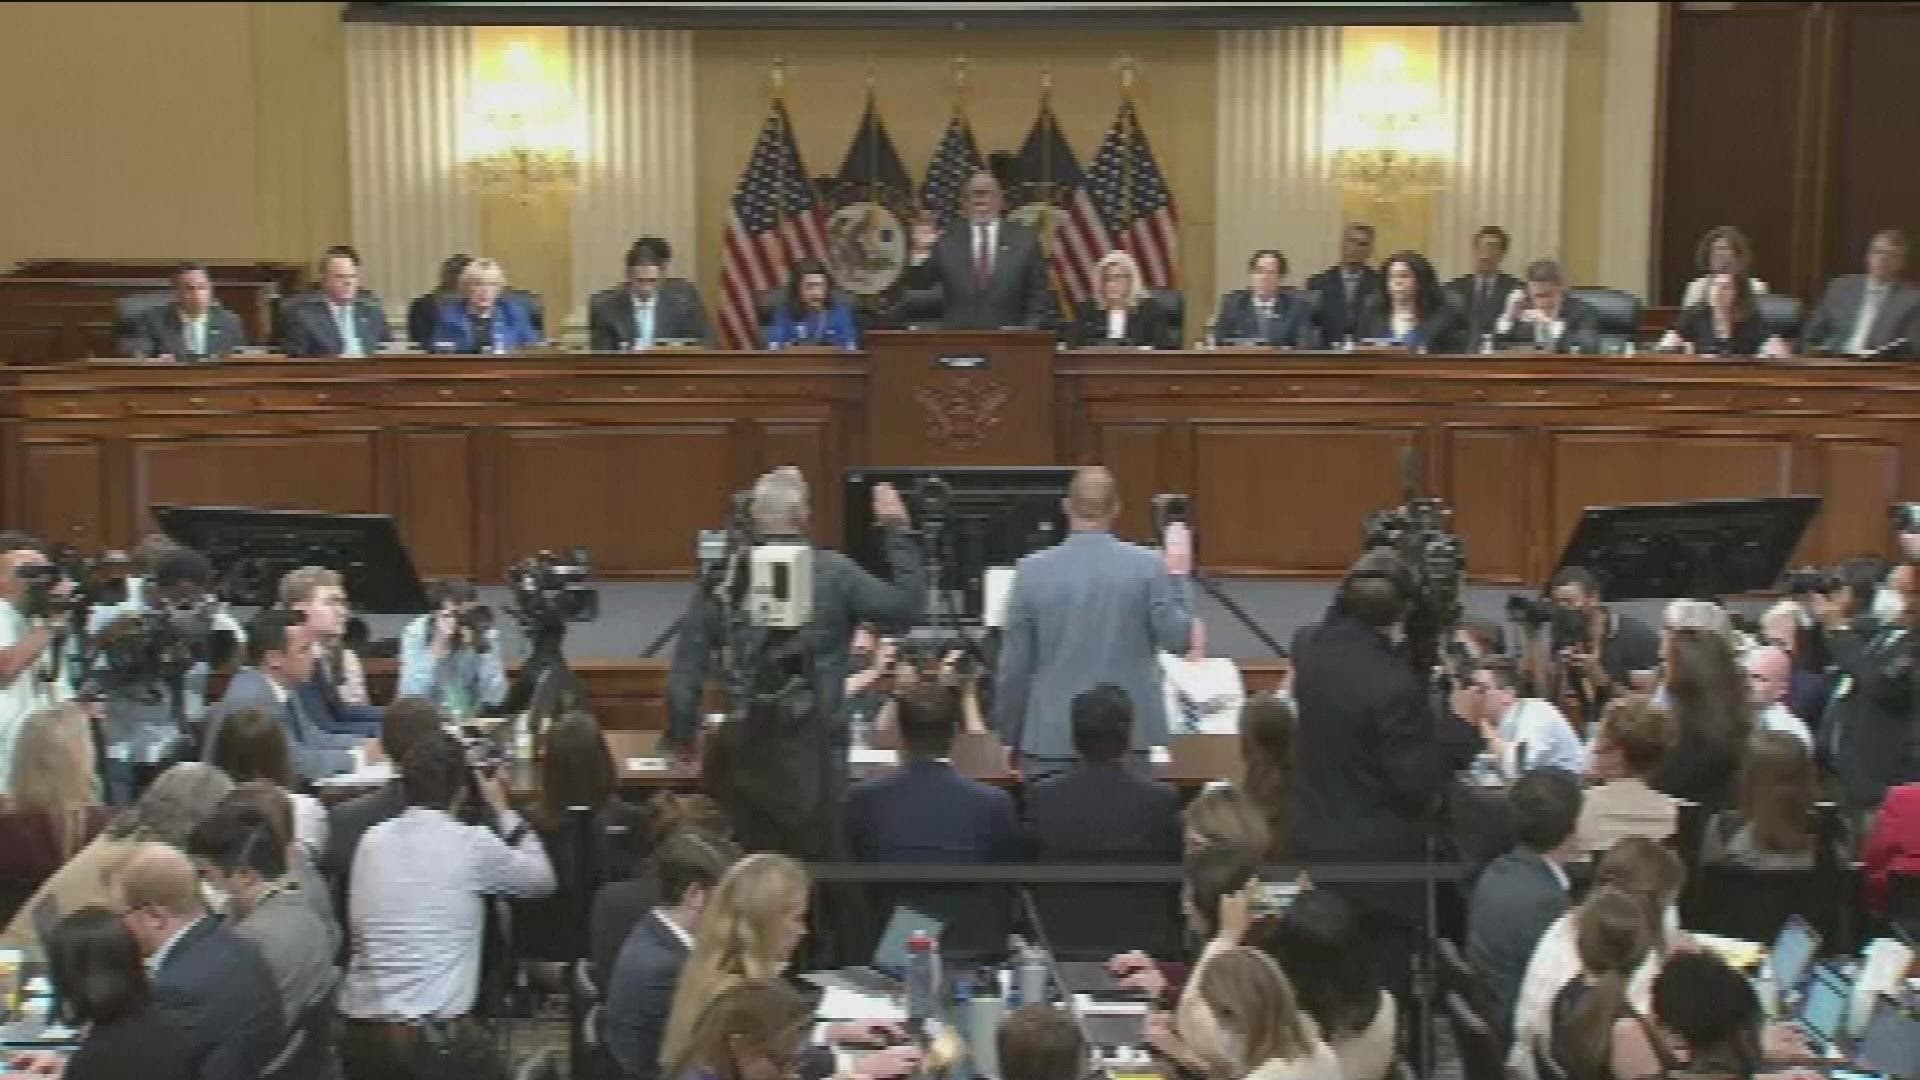 This could be the final hearing before the committee releases a report on their findings over the last 14 months.